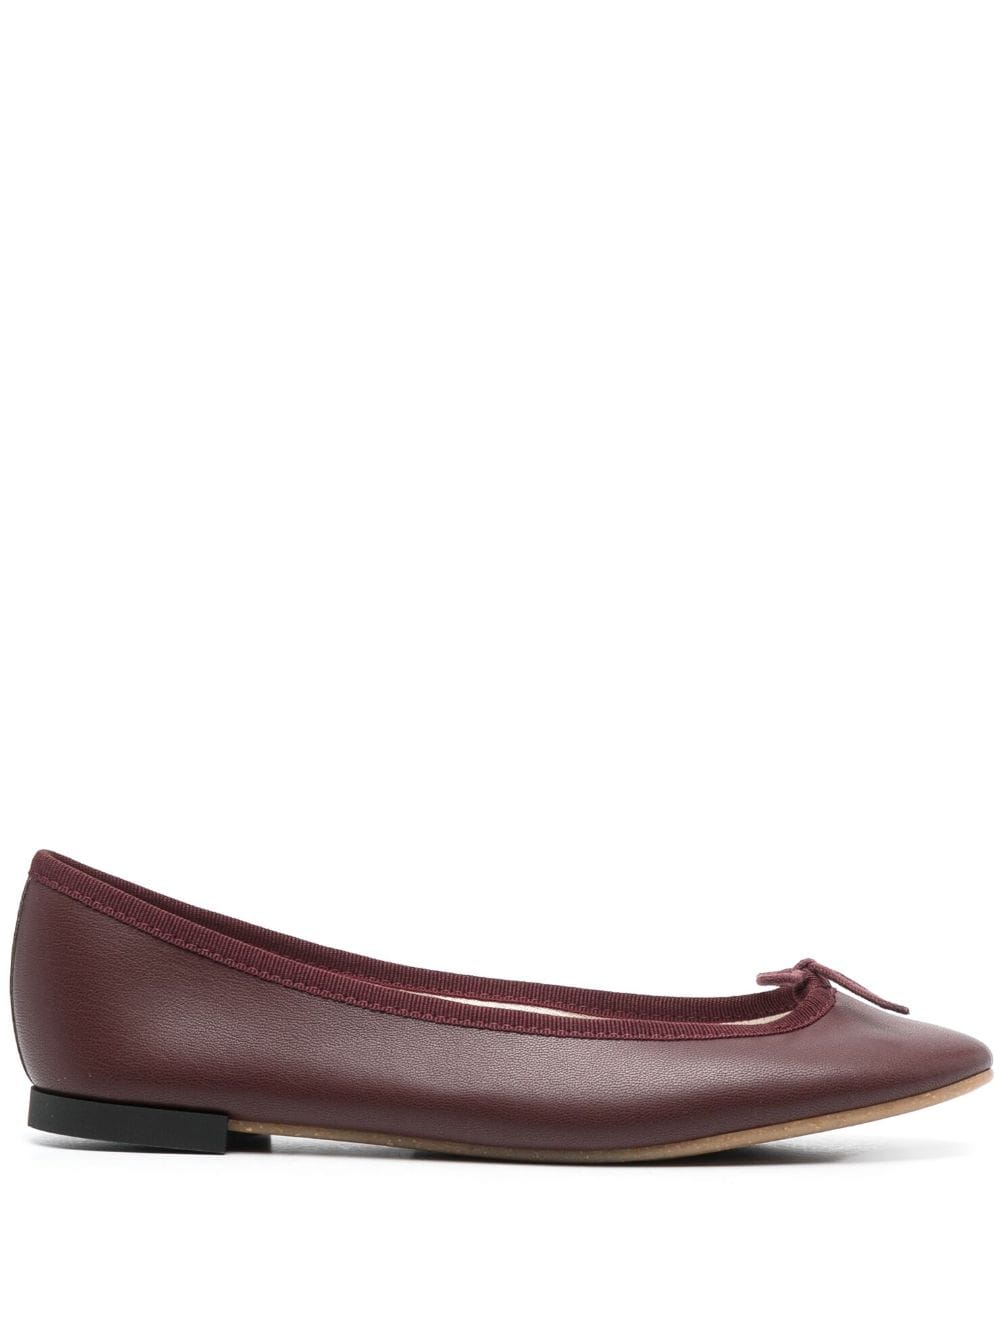 Repetto bow-detail leather ballerina shoes - Brown